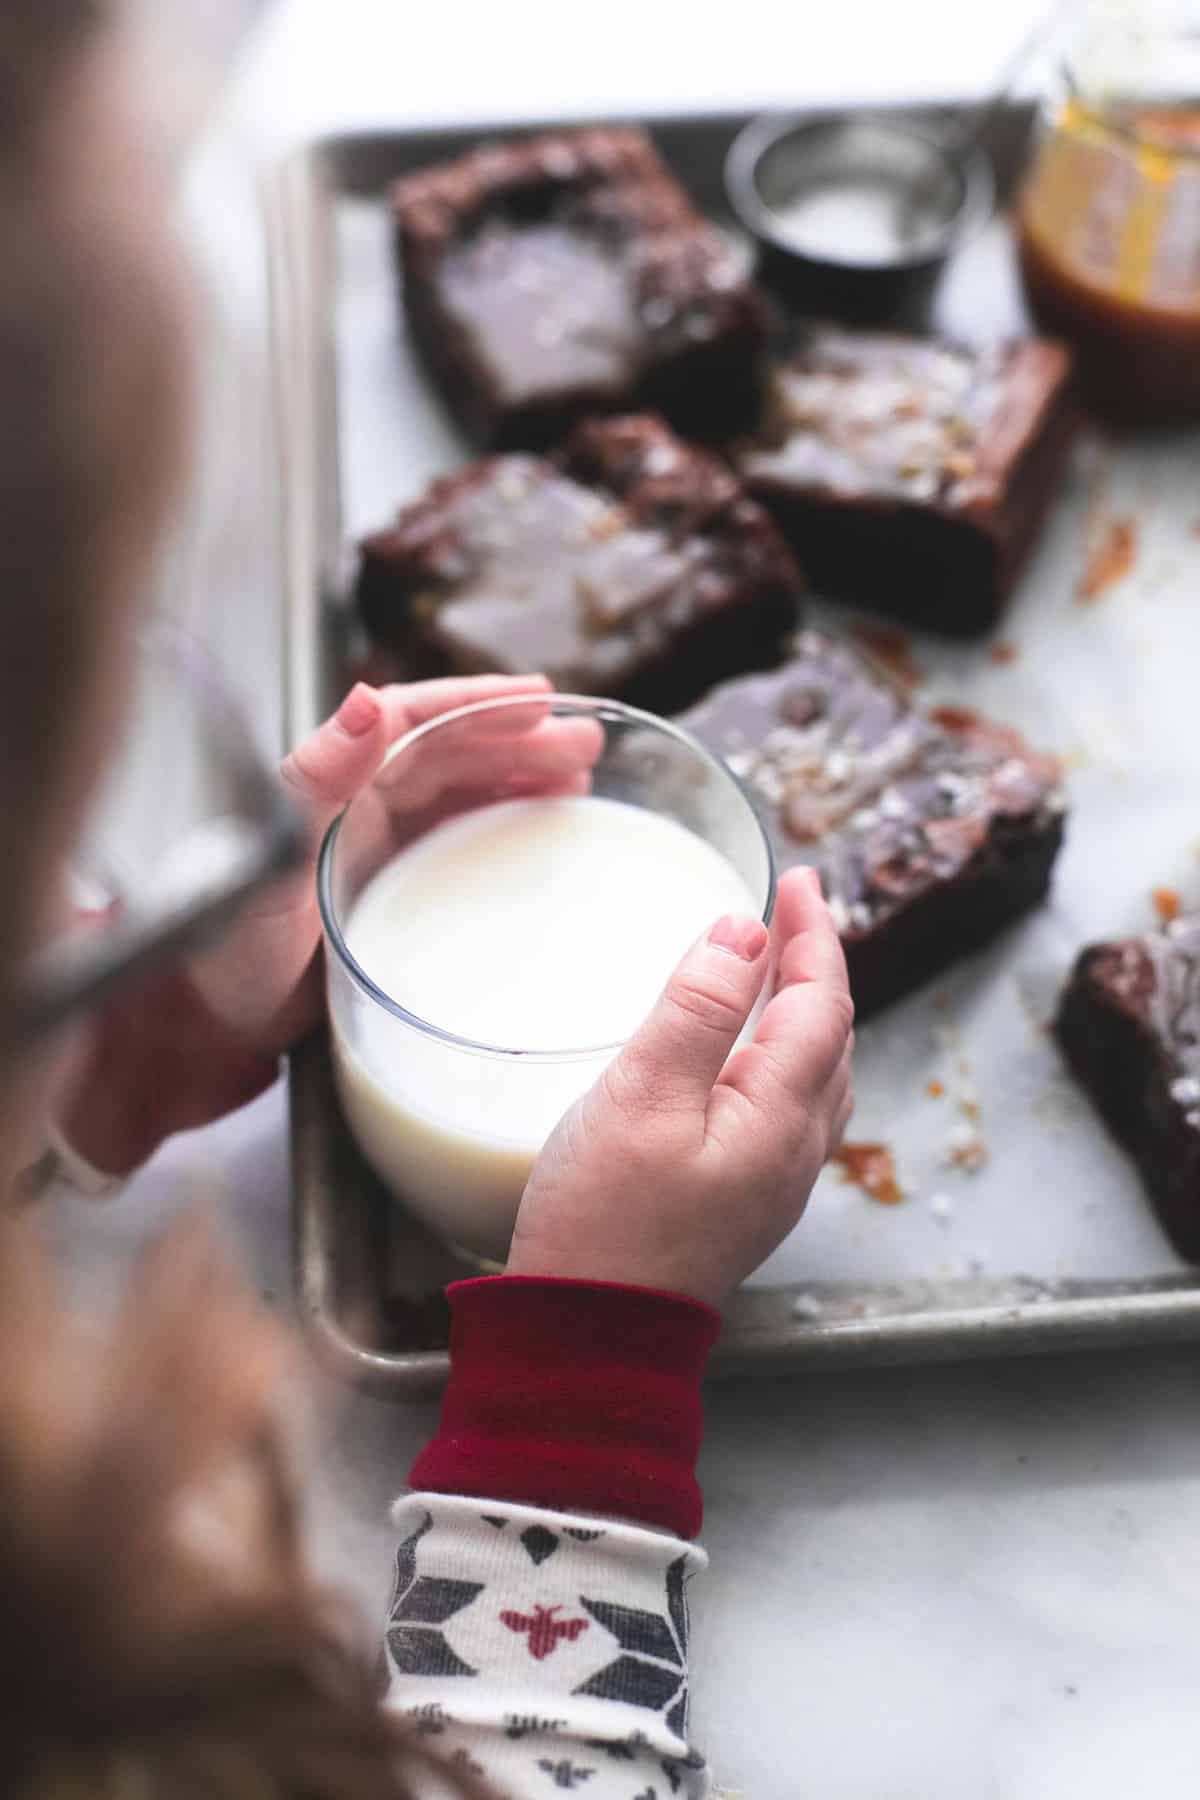 a little girl grabbing a glass of milk off of a baking pan with salted caramel brownies, a container of salt and a jar of caramel on it.